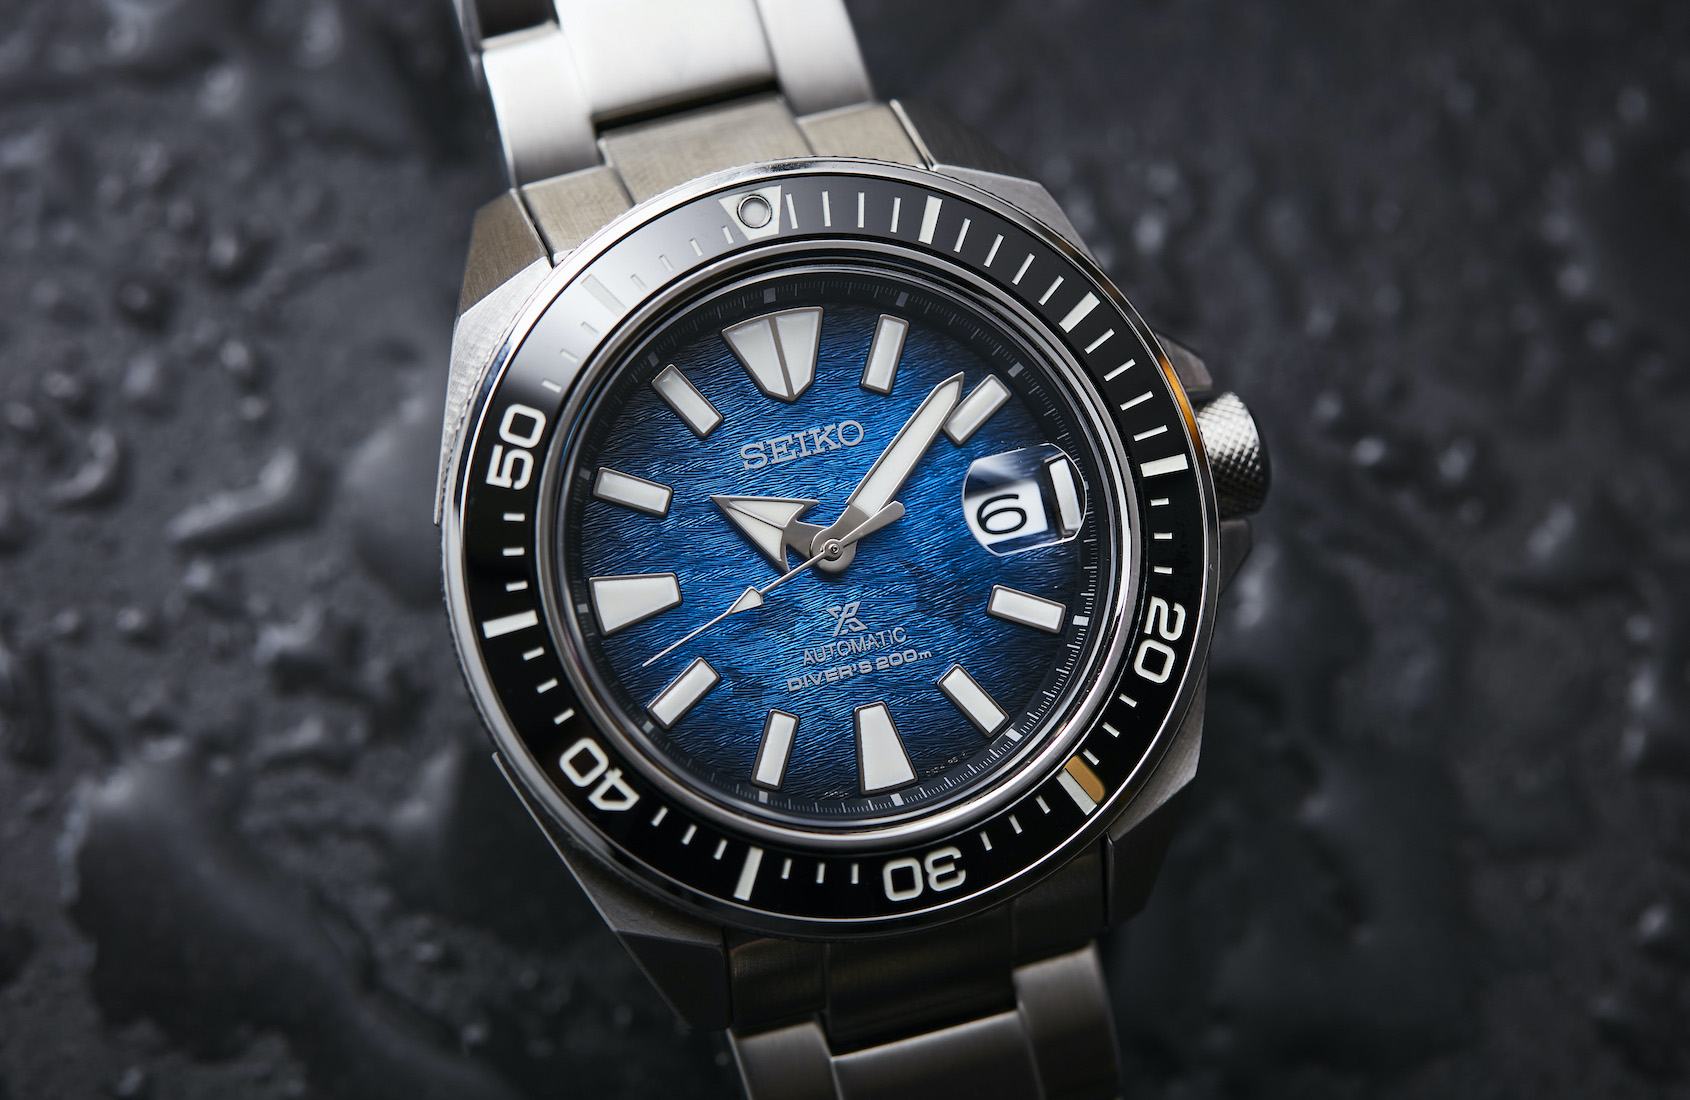 krigsskib maling Arbejdsgiver INTRODUCING: the SEIKO Prospex Save the Oceans SRPE33K